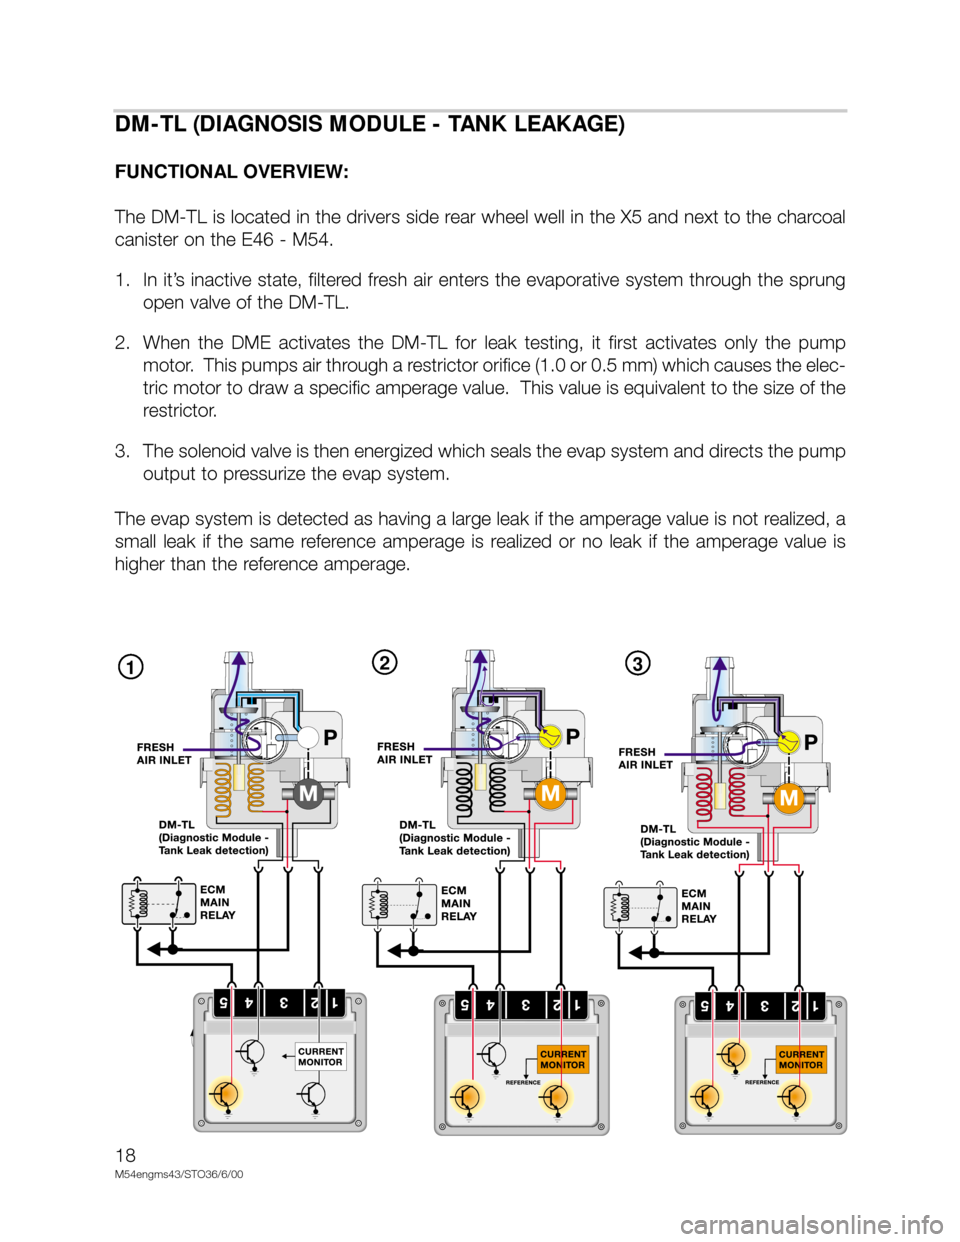 BMW X5 2005 E53 M54 Engine Workshop Manual 18
M54engms43/STO36/6/00
123
DM-TL (DIAGNOSIS MODULE - TANK LEAKAGE)
FUNCTIONAL OVERVIEW:
The DM-TL is located in the drivers side rear wheel well in the X5 and next to the charcoal
canister on the E4